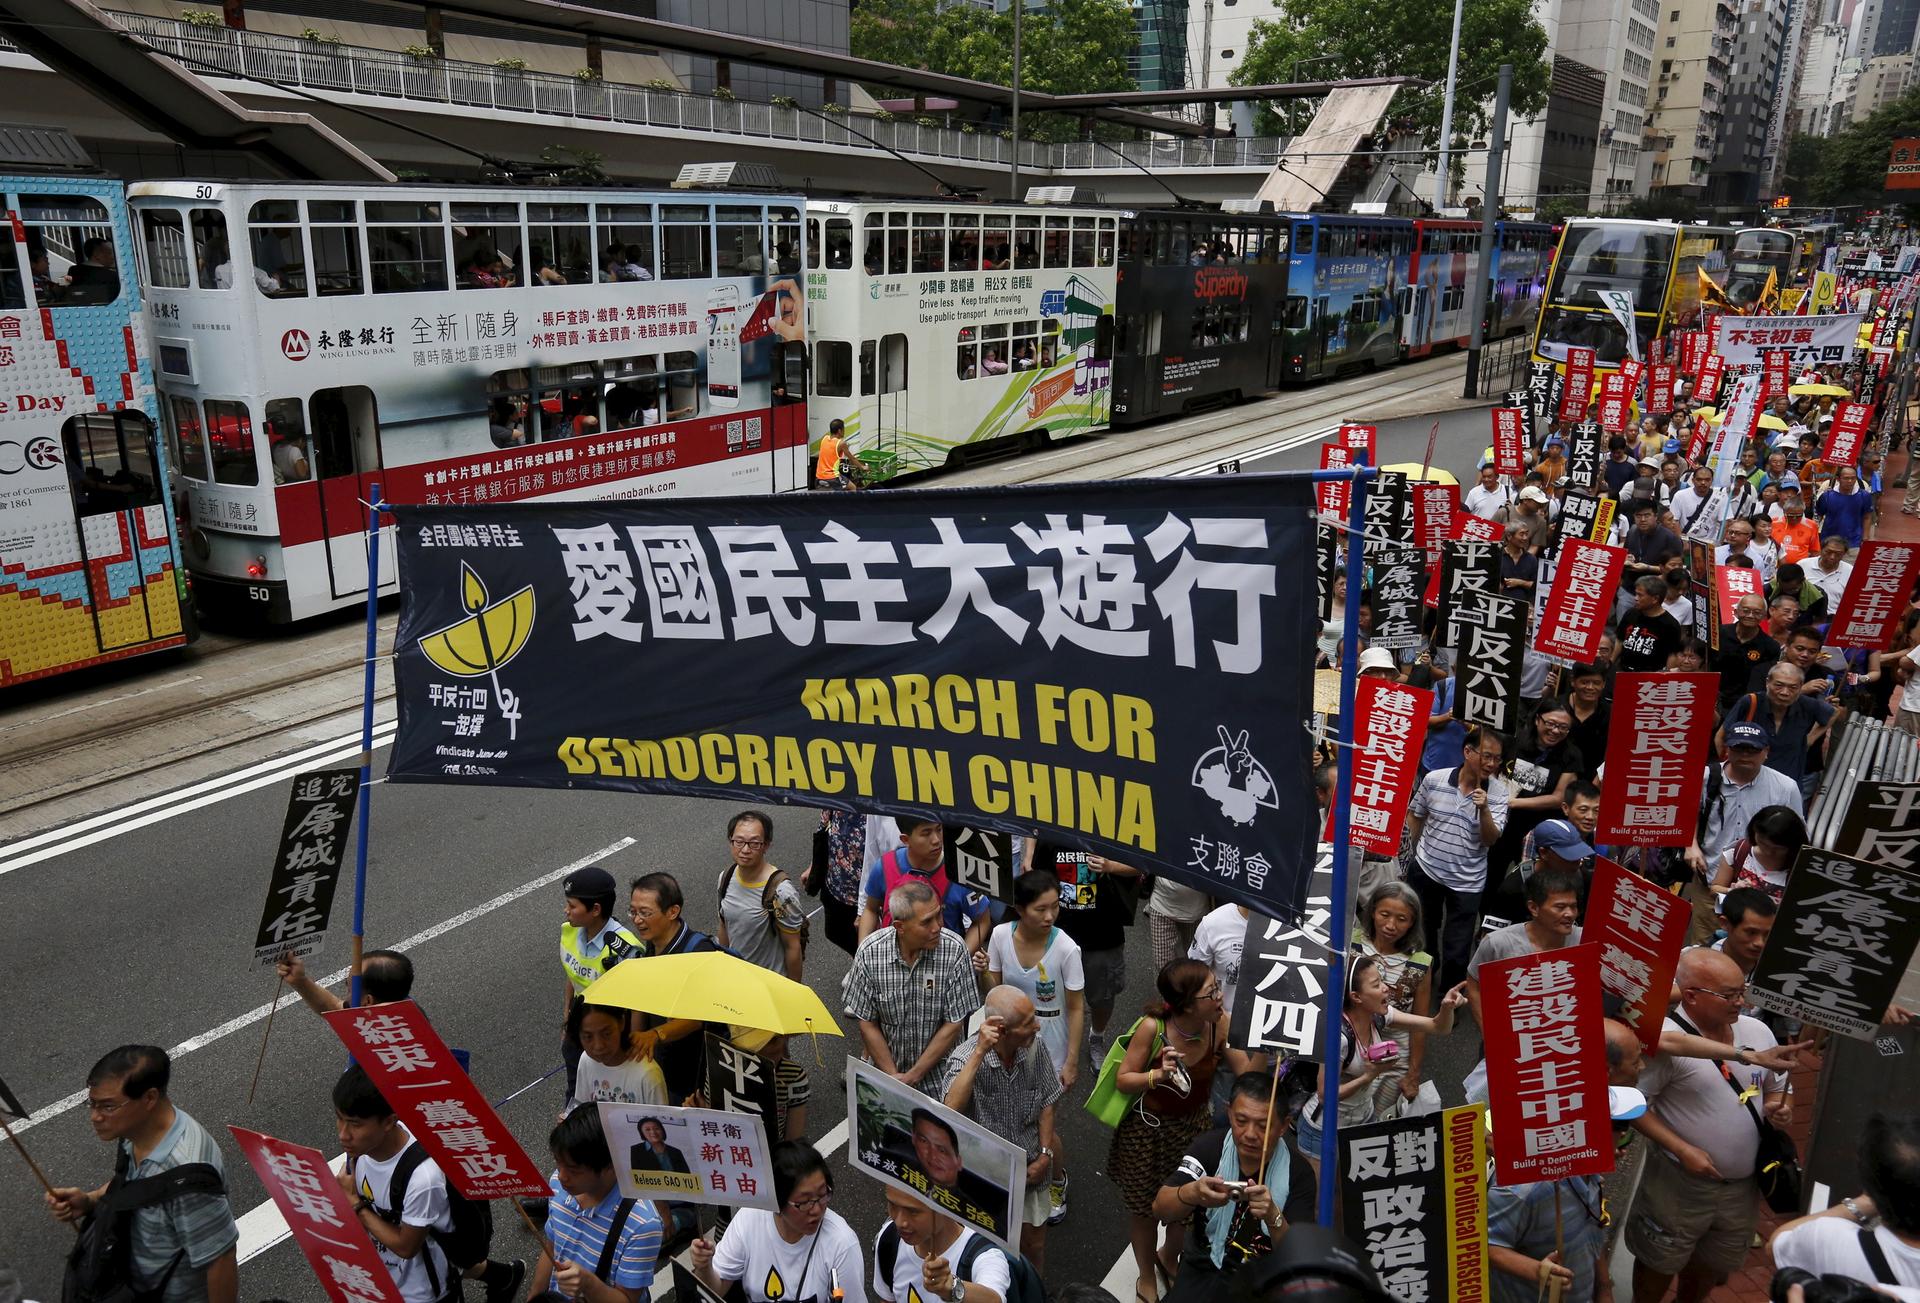 In Hong Kong, pro-democracy protesters take to the streets every year to mark the anniversary of the 1989 Tiananmen crackdown. This type of protest would never be allowed in mainland China.